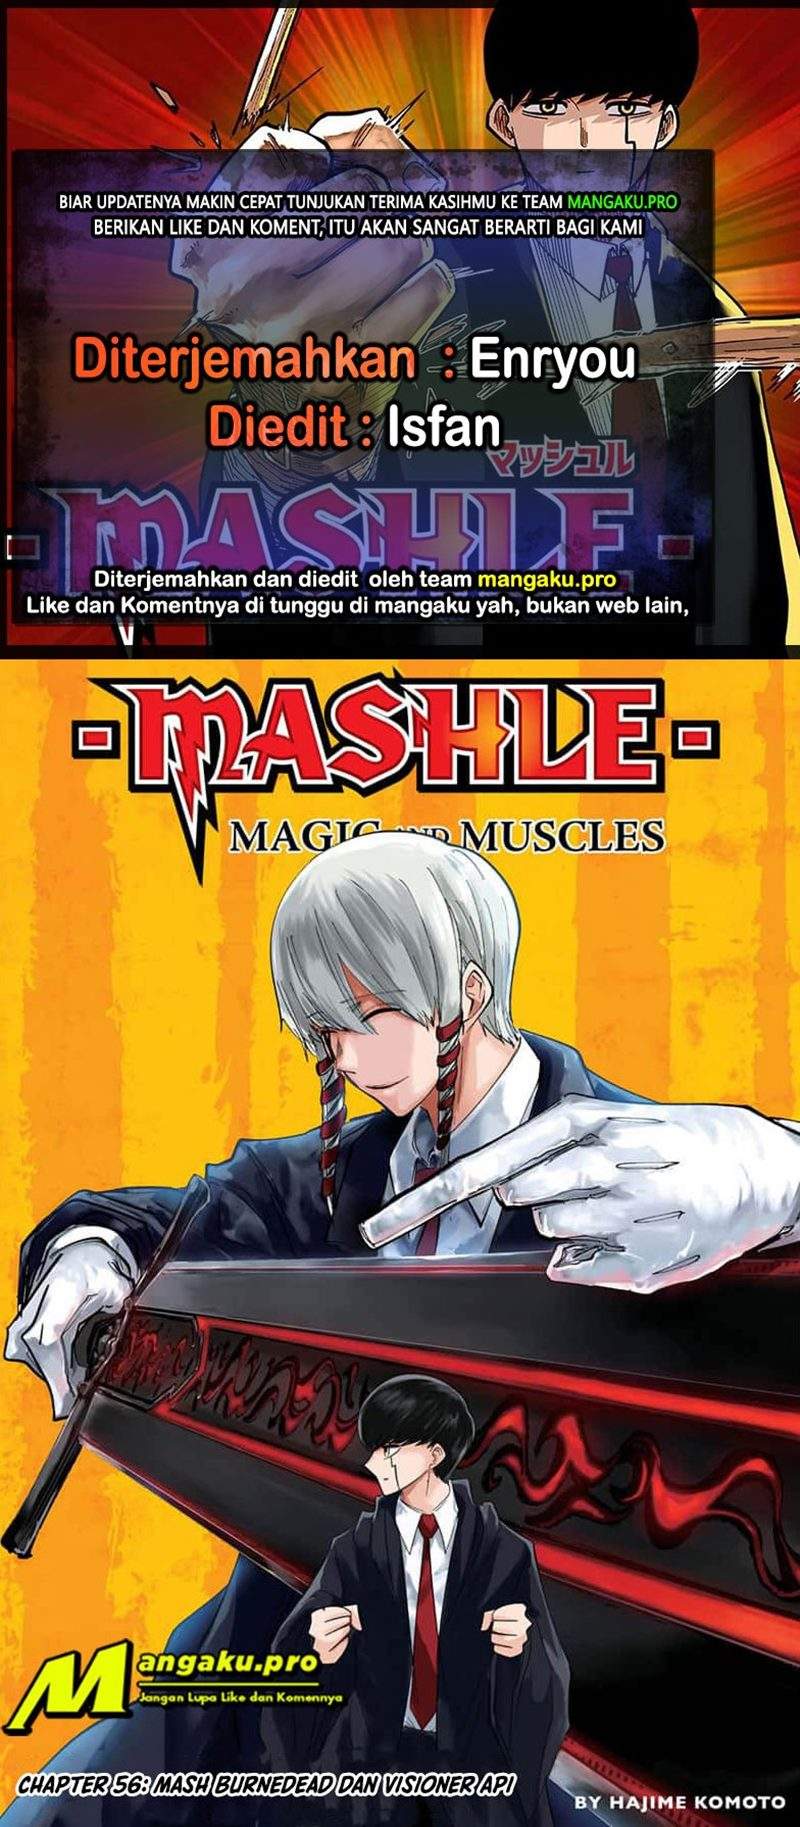 Mashle: Magic And Muscles Chapter 56 - 55